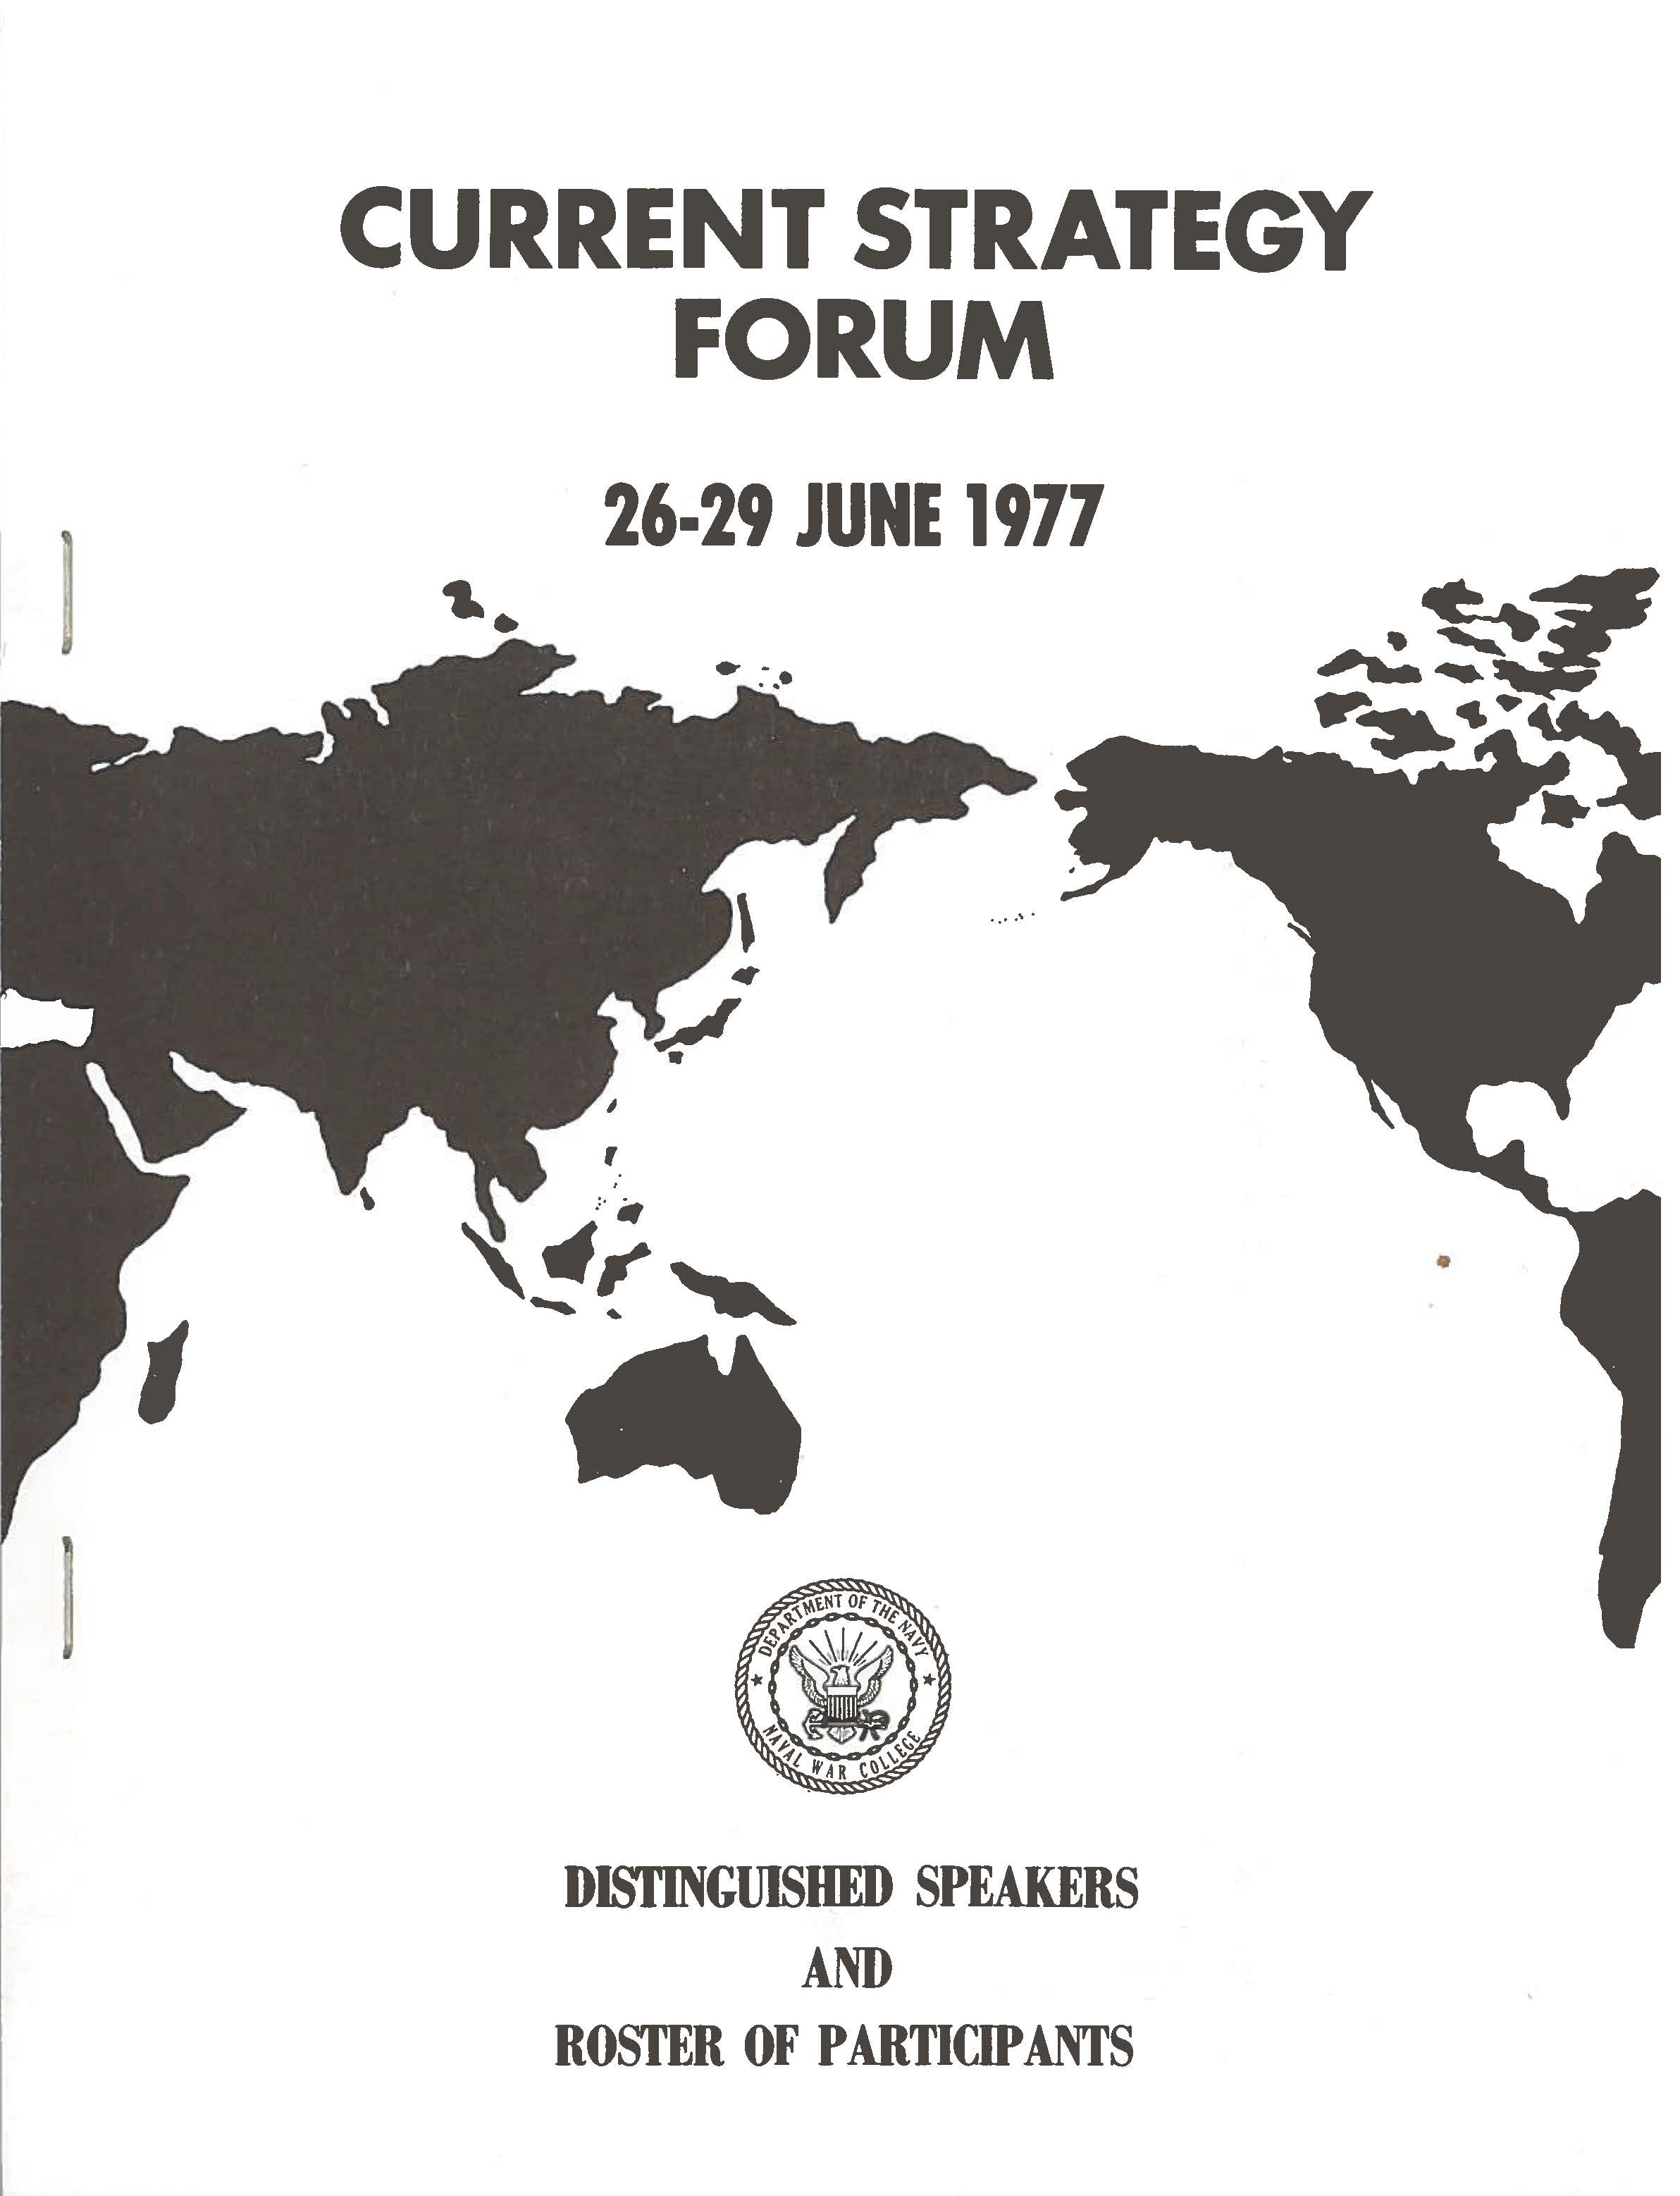 Current Strategy Forum distinguished speakers and roster of participants, 1977